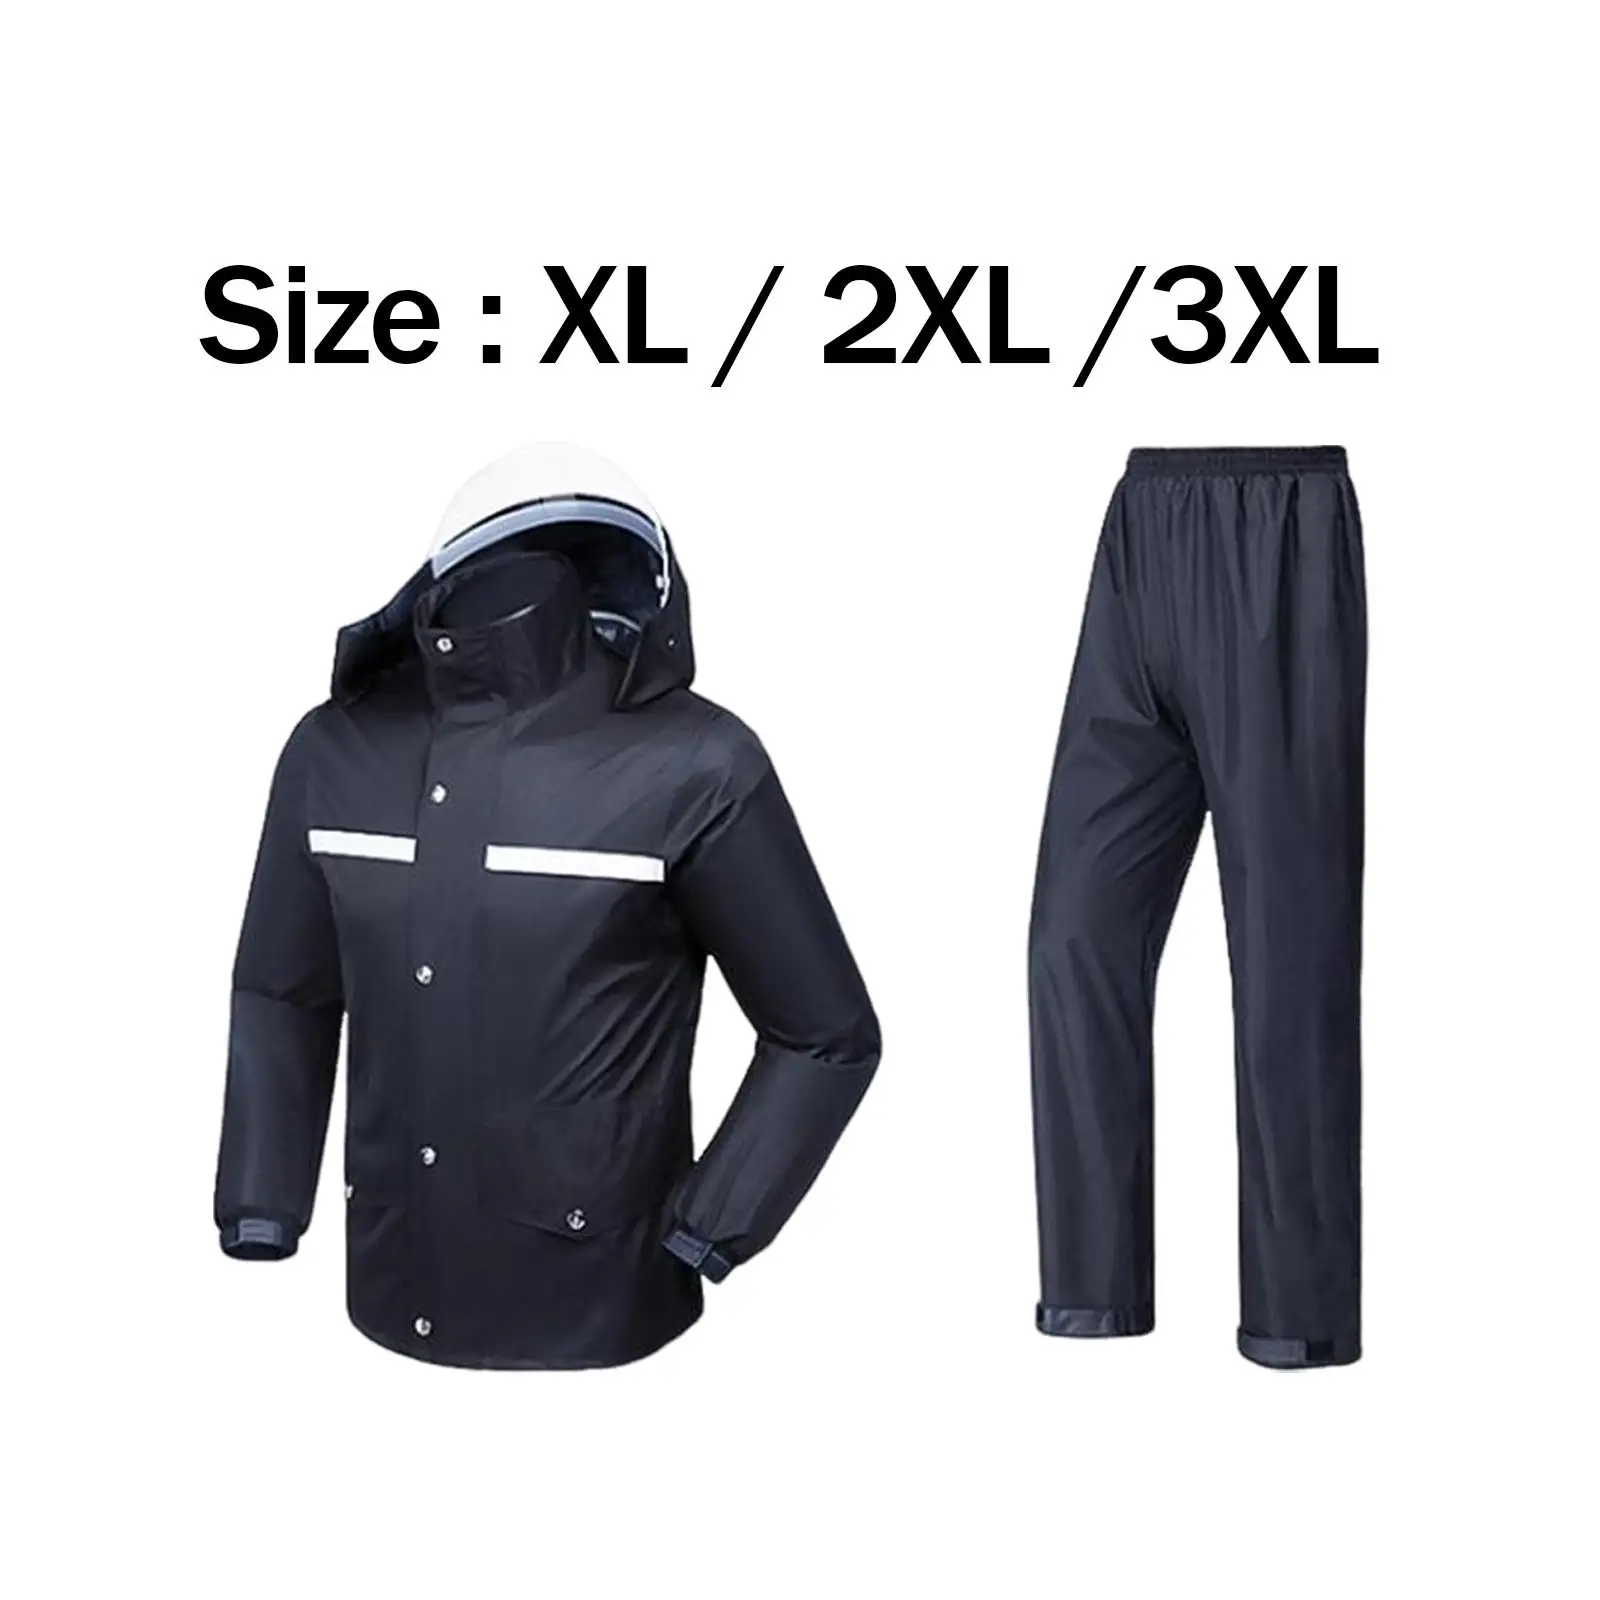 Motorcycle Raincoat with Jacket and Pants Durable Breathable Fabric Reflective Transparent Brim Rainwear for Men and Women